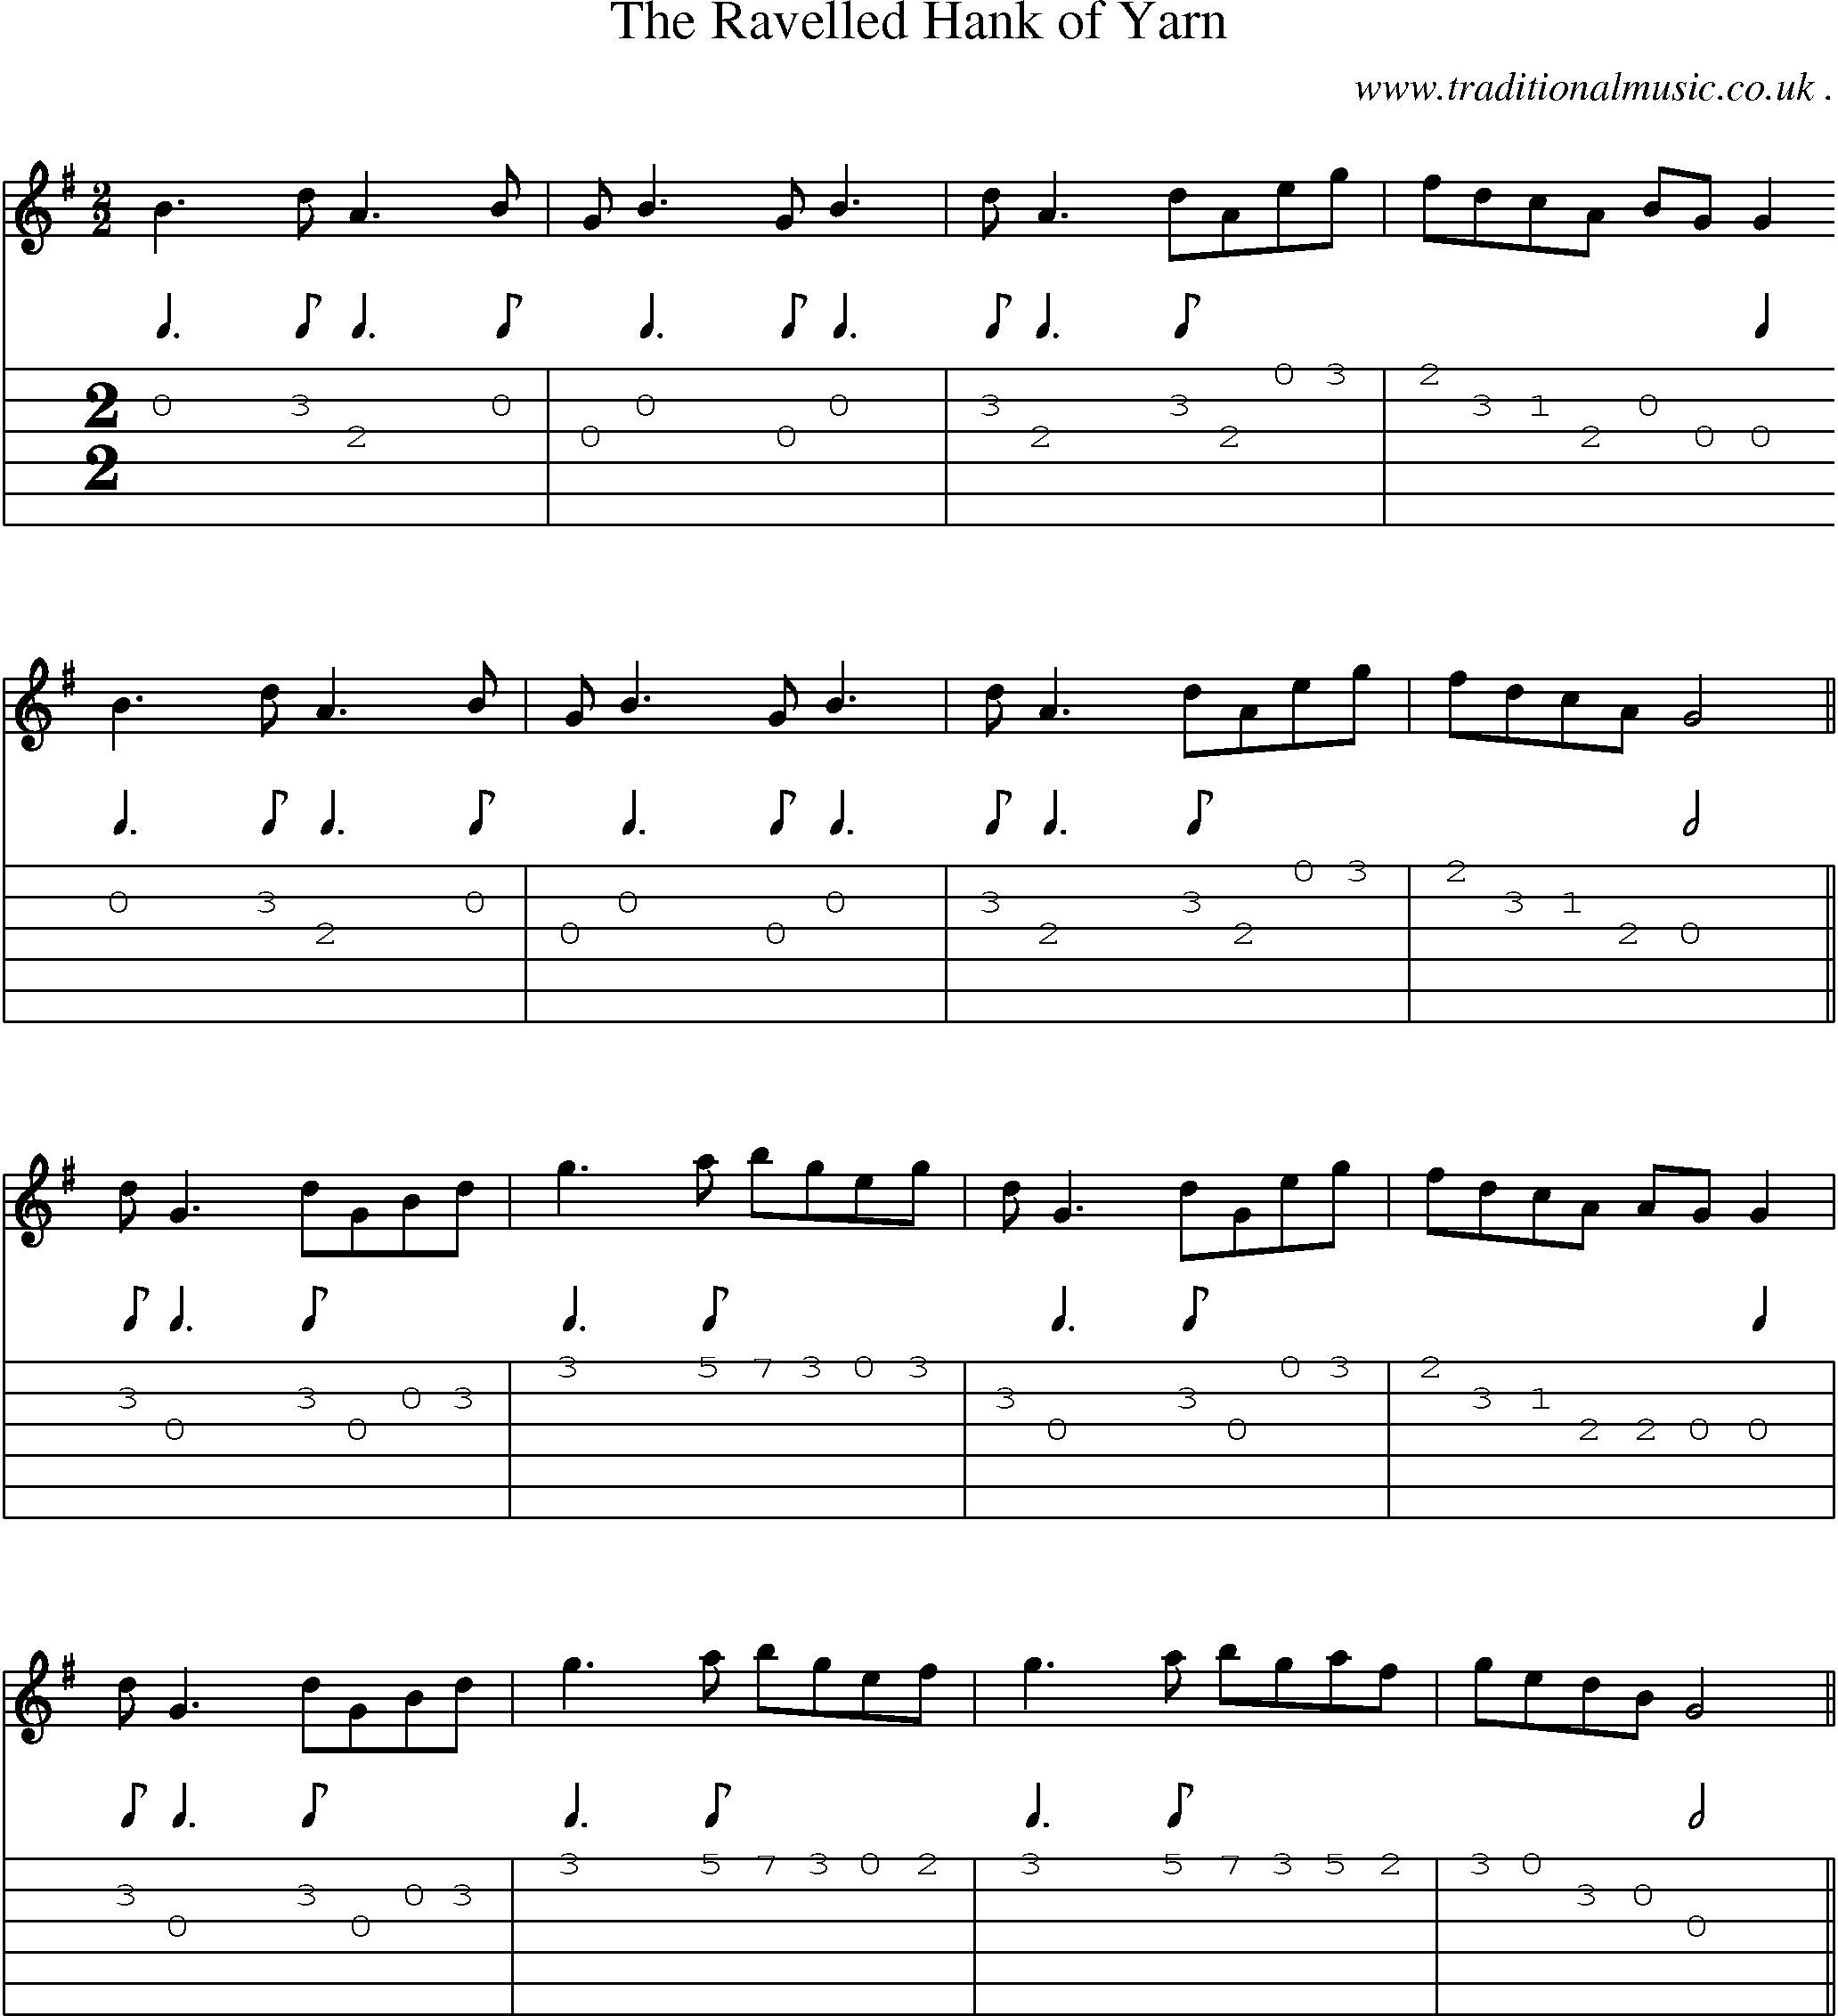 Sheet-Music and Guitar Tabs for The Ravelled Hank Of Yarn